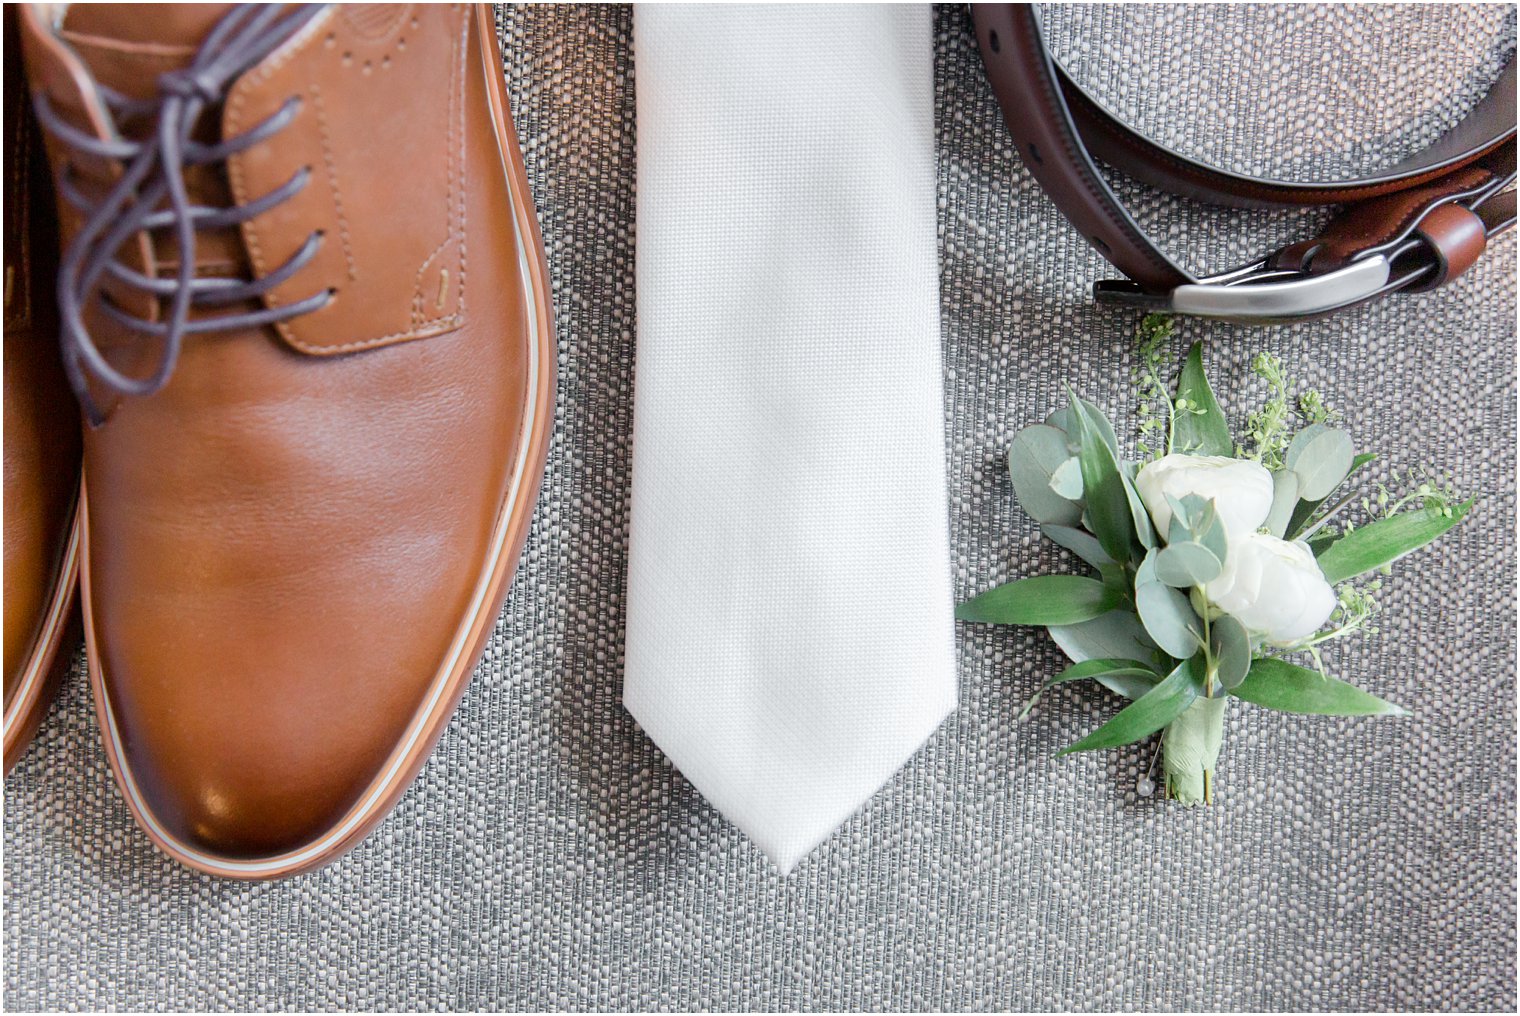 Groom's shoes, tie, and boutonniere | Stone House at Stirling Ridge Wedding Photography by Idalia Photography